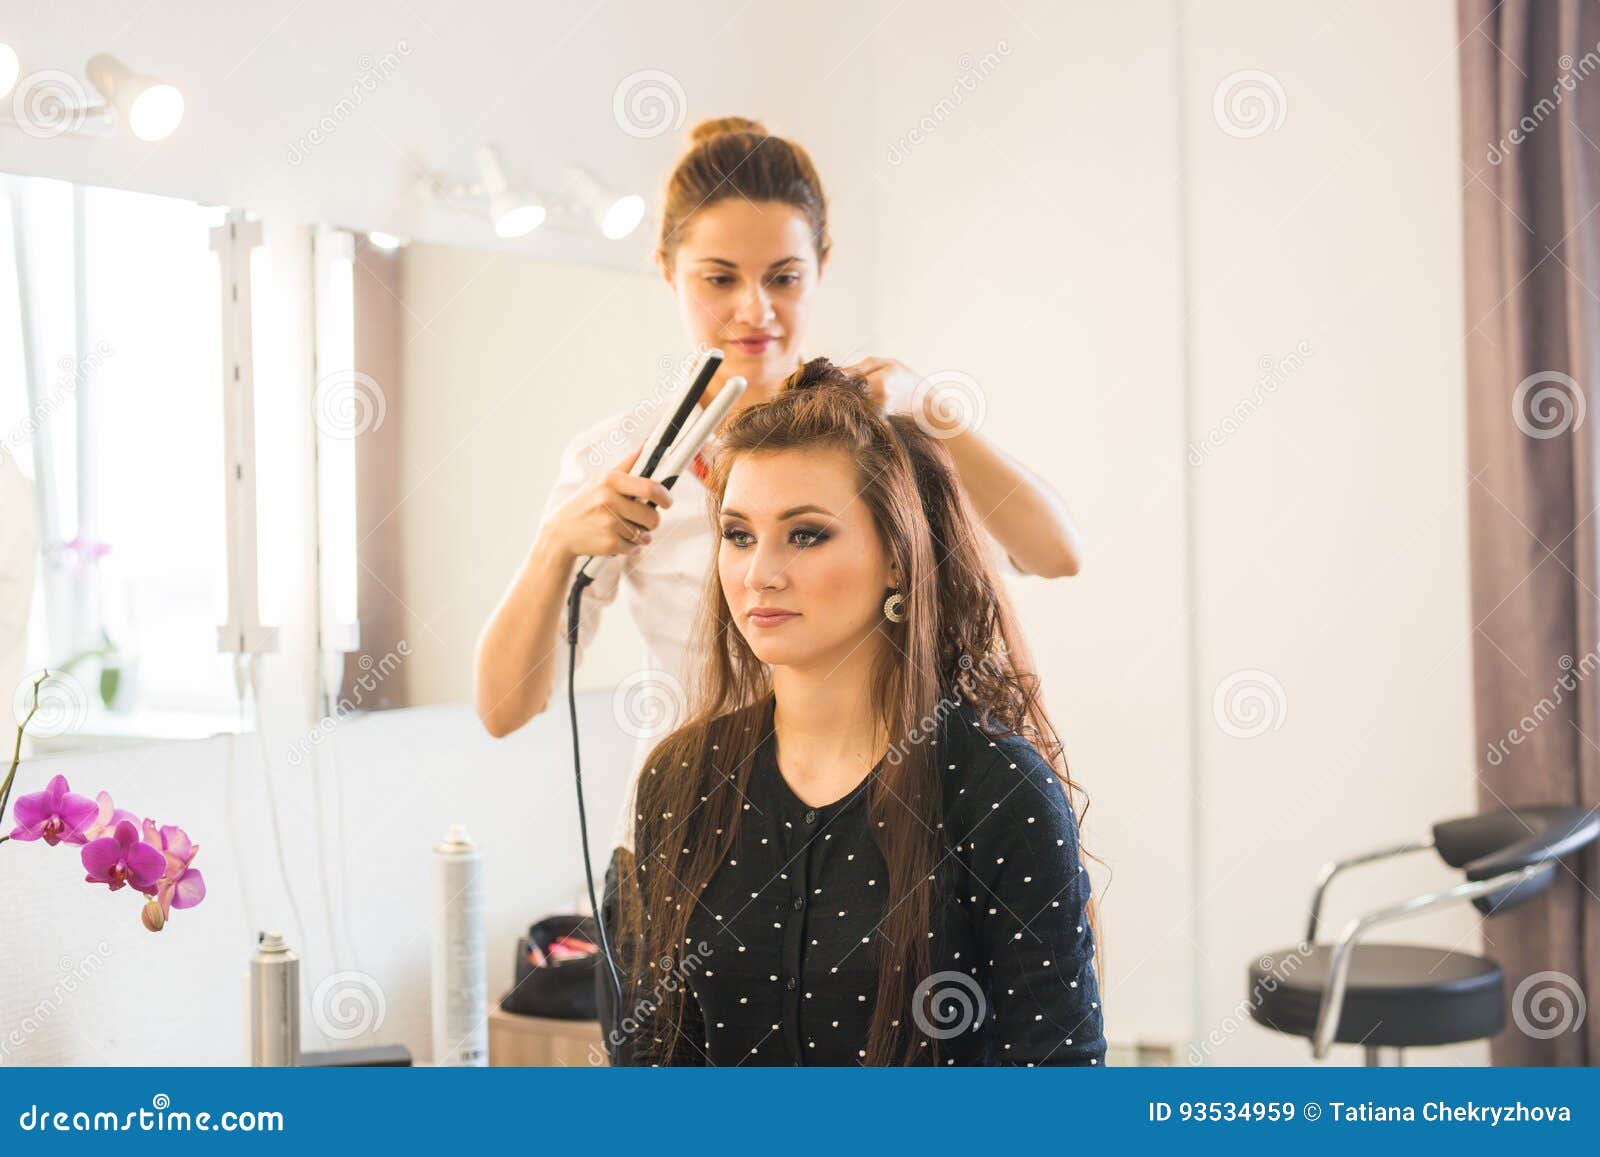 working day inside the beauty salon. hairdresser makes hair styling